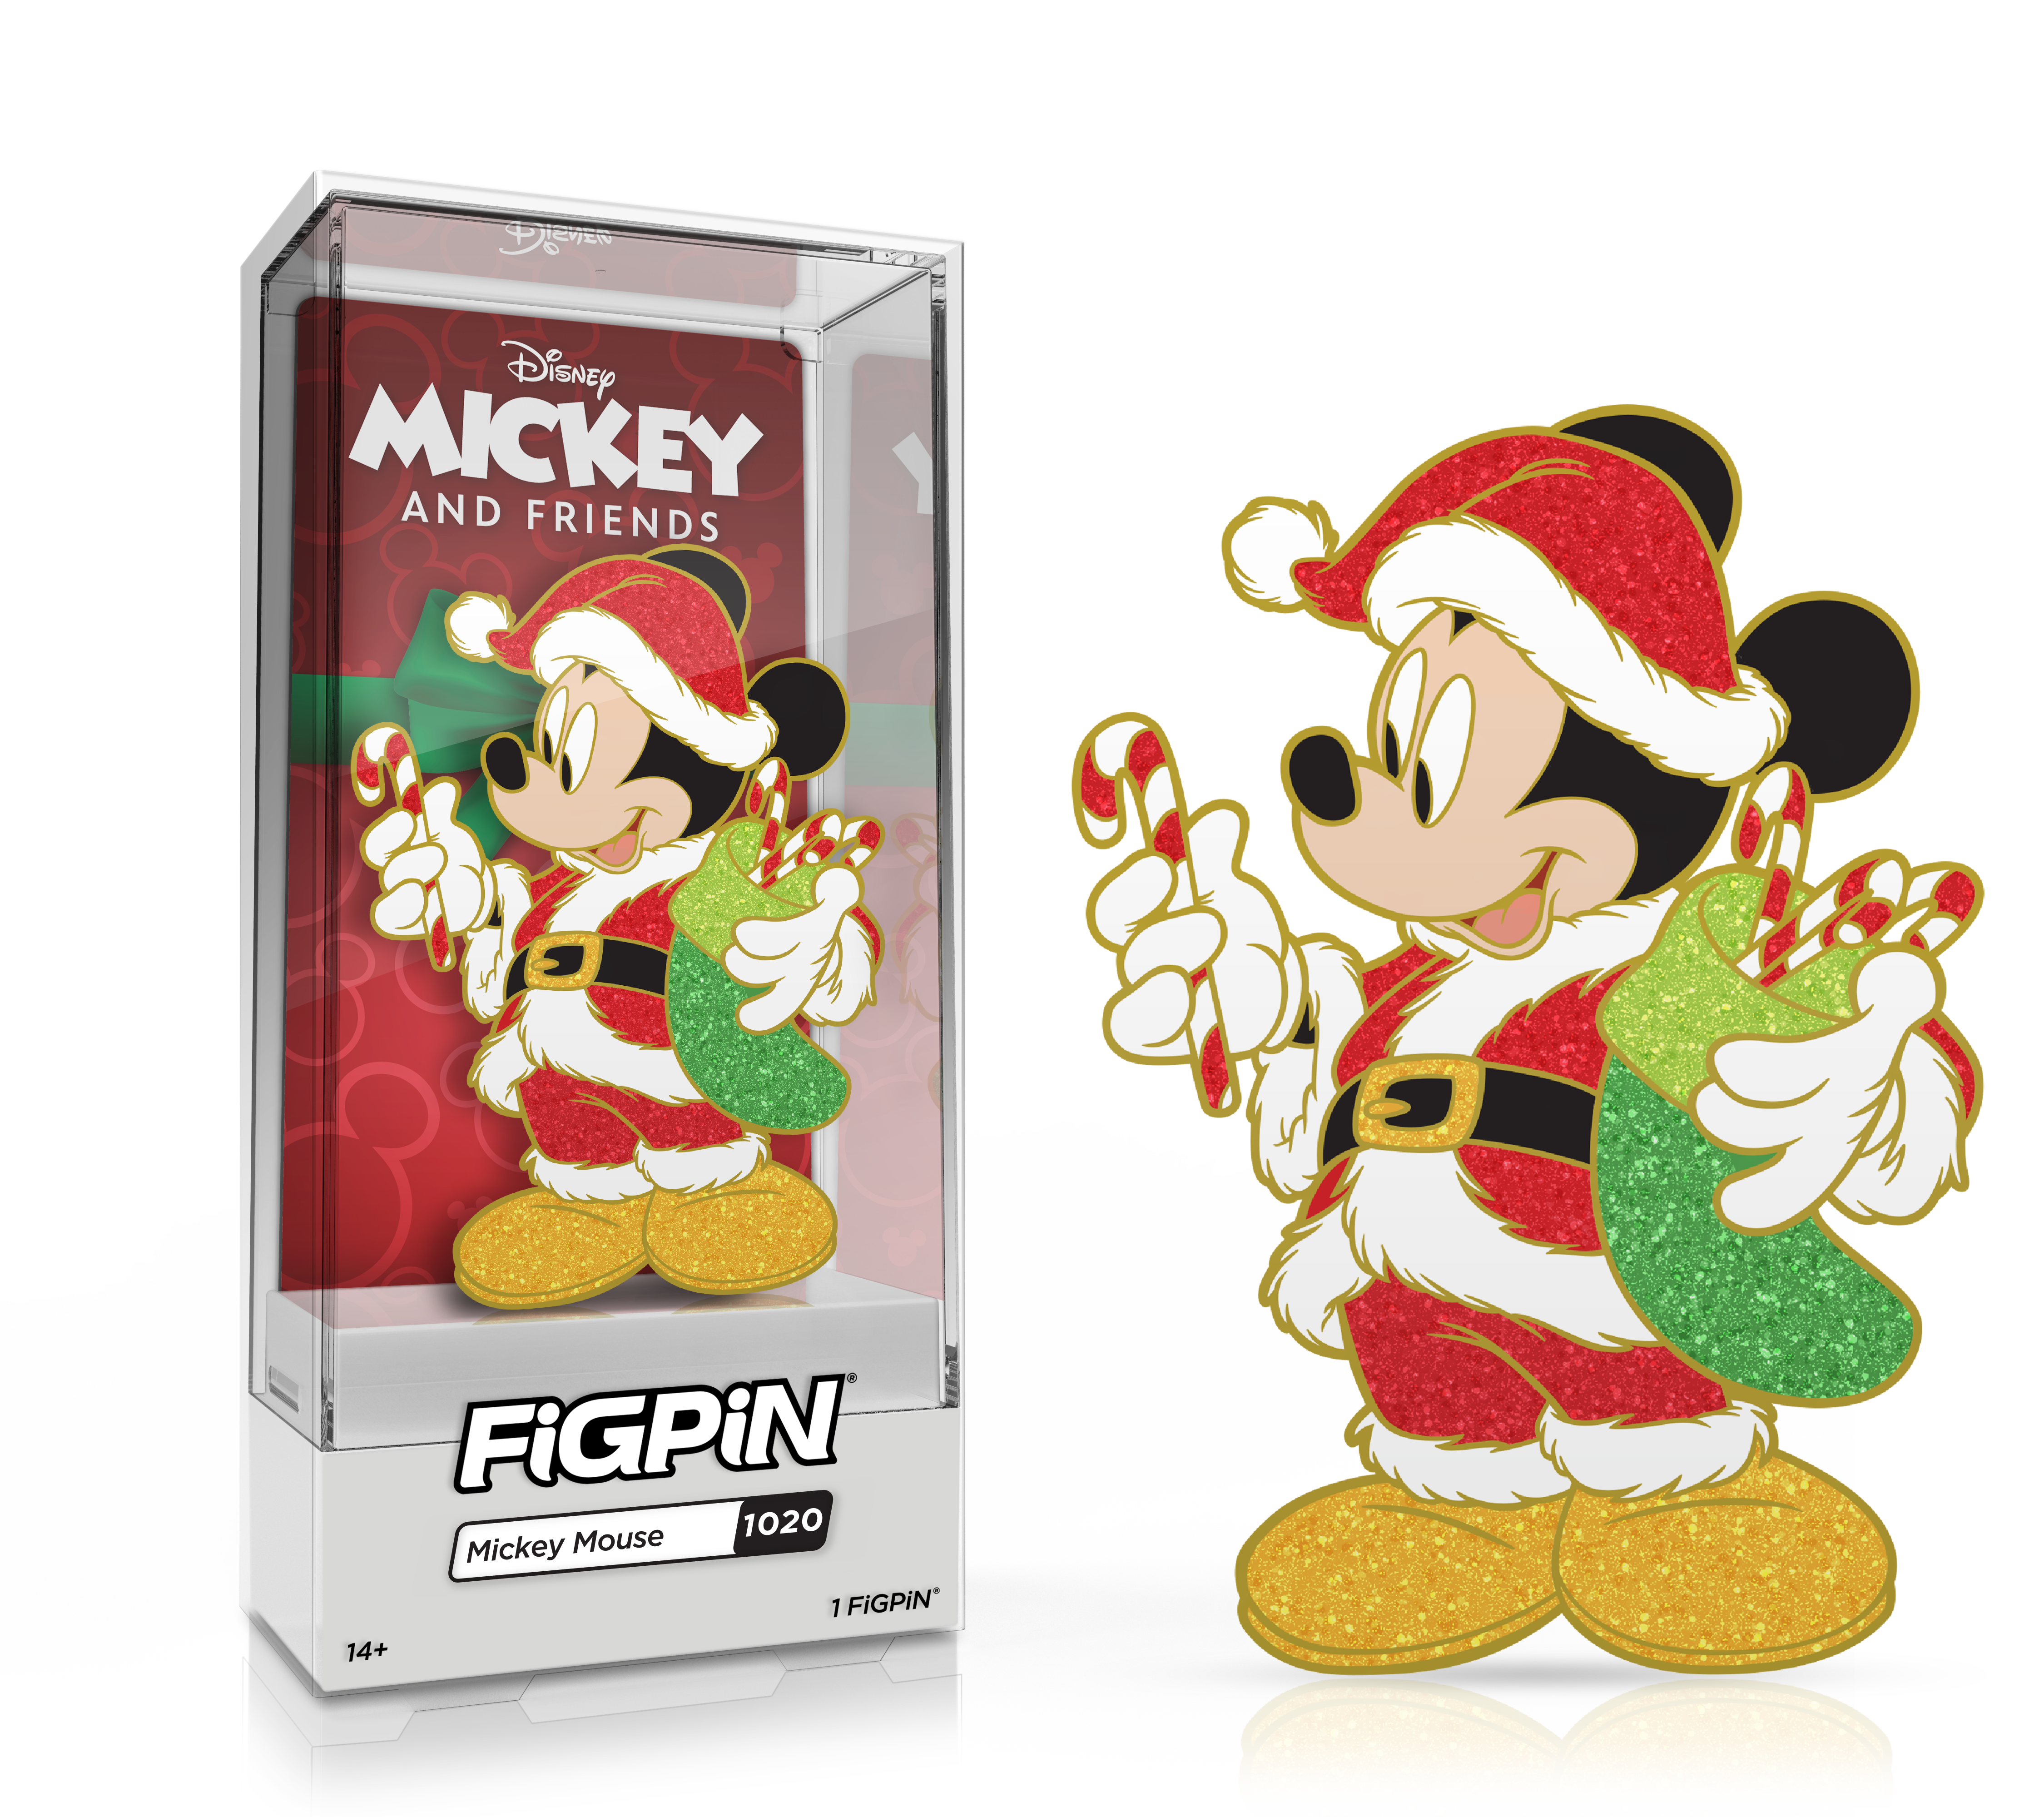 Side by side view of Disney's Mickey Mouse enamel pin in display case and the art render.